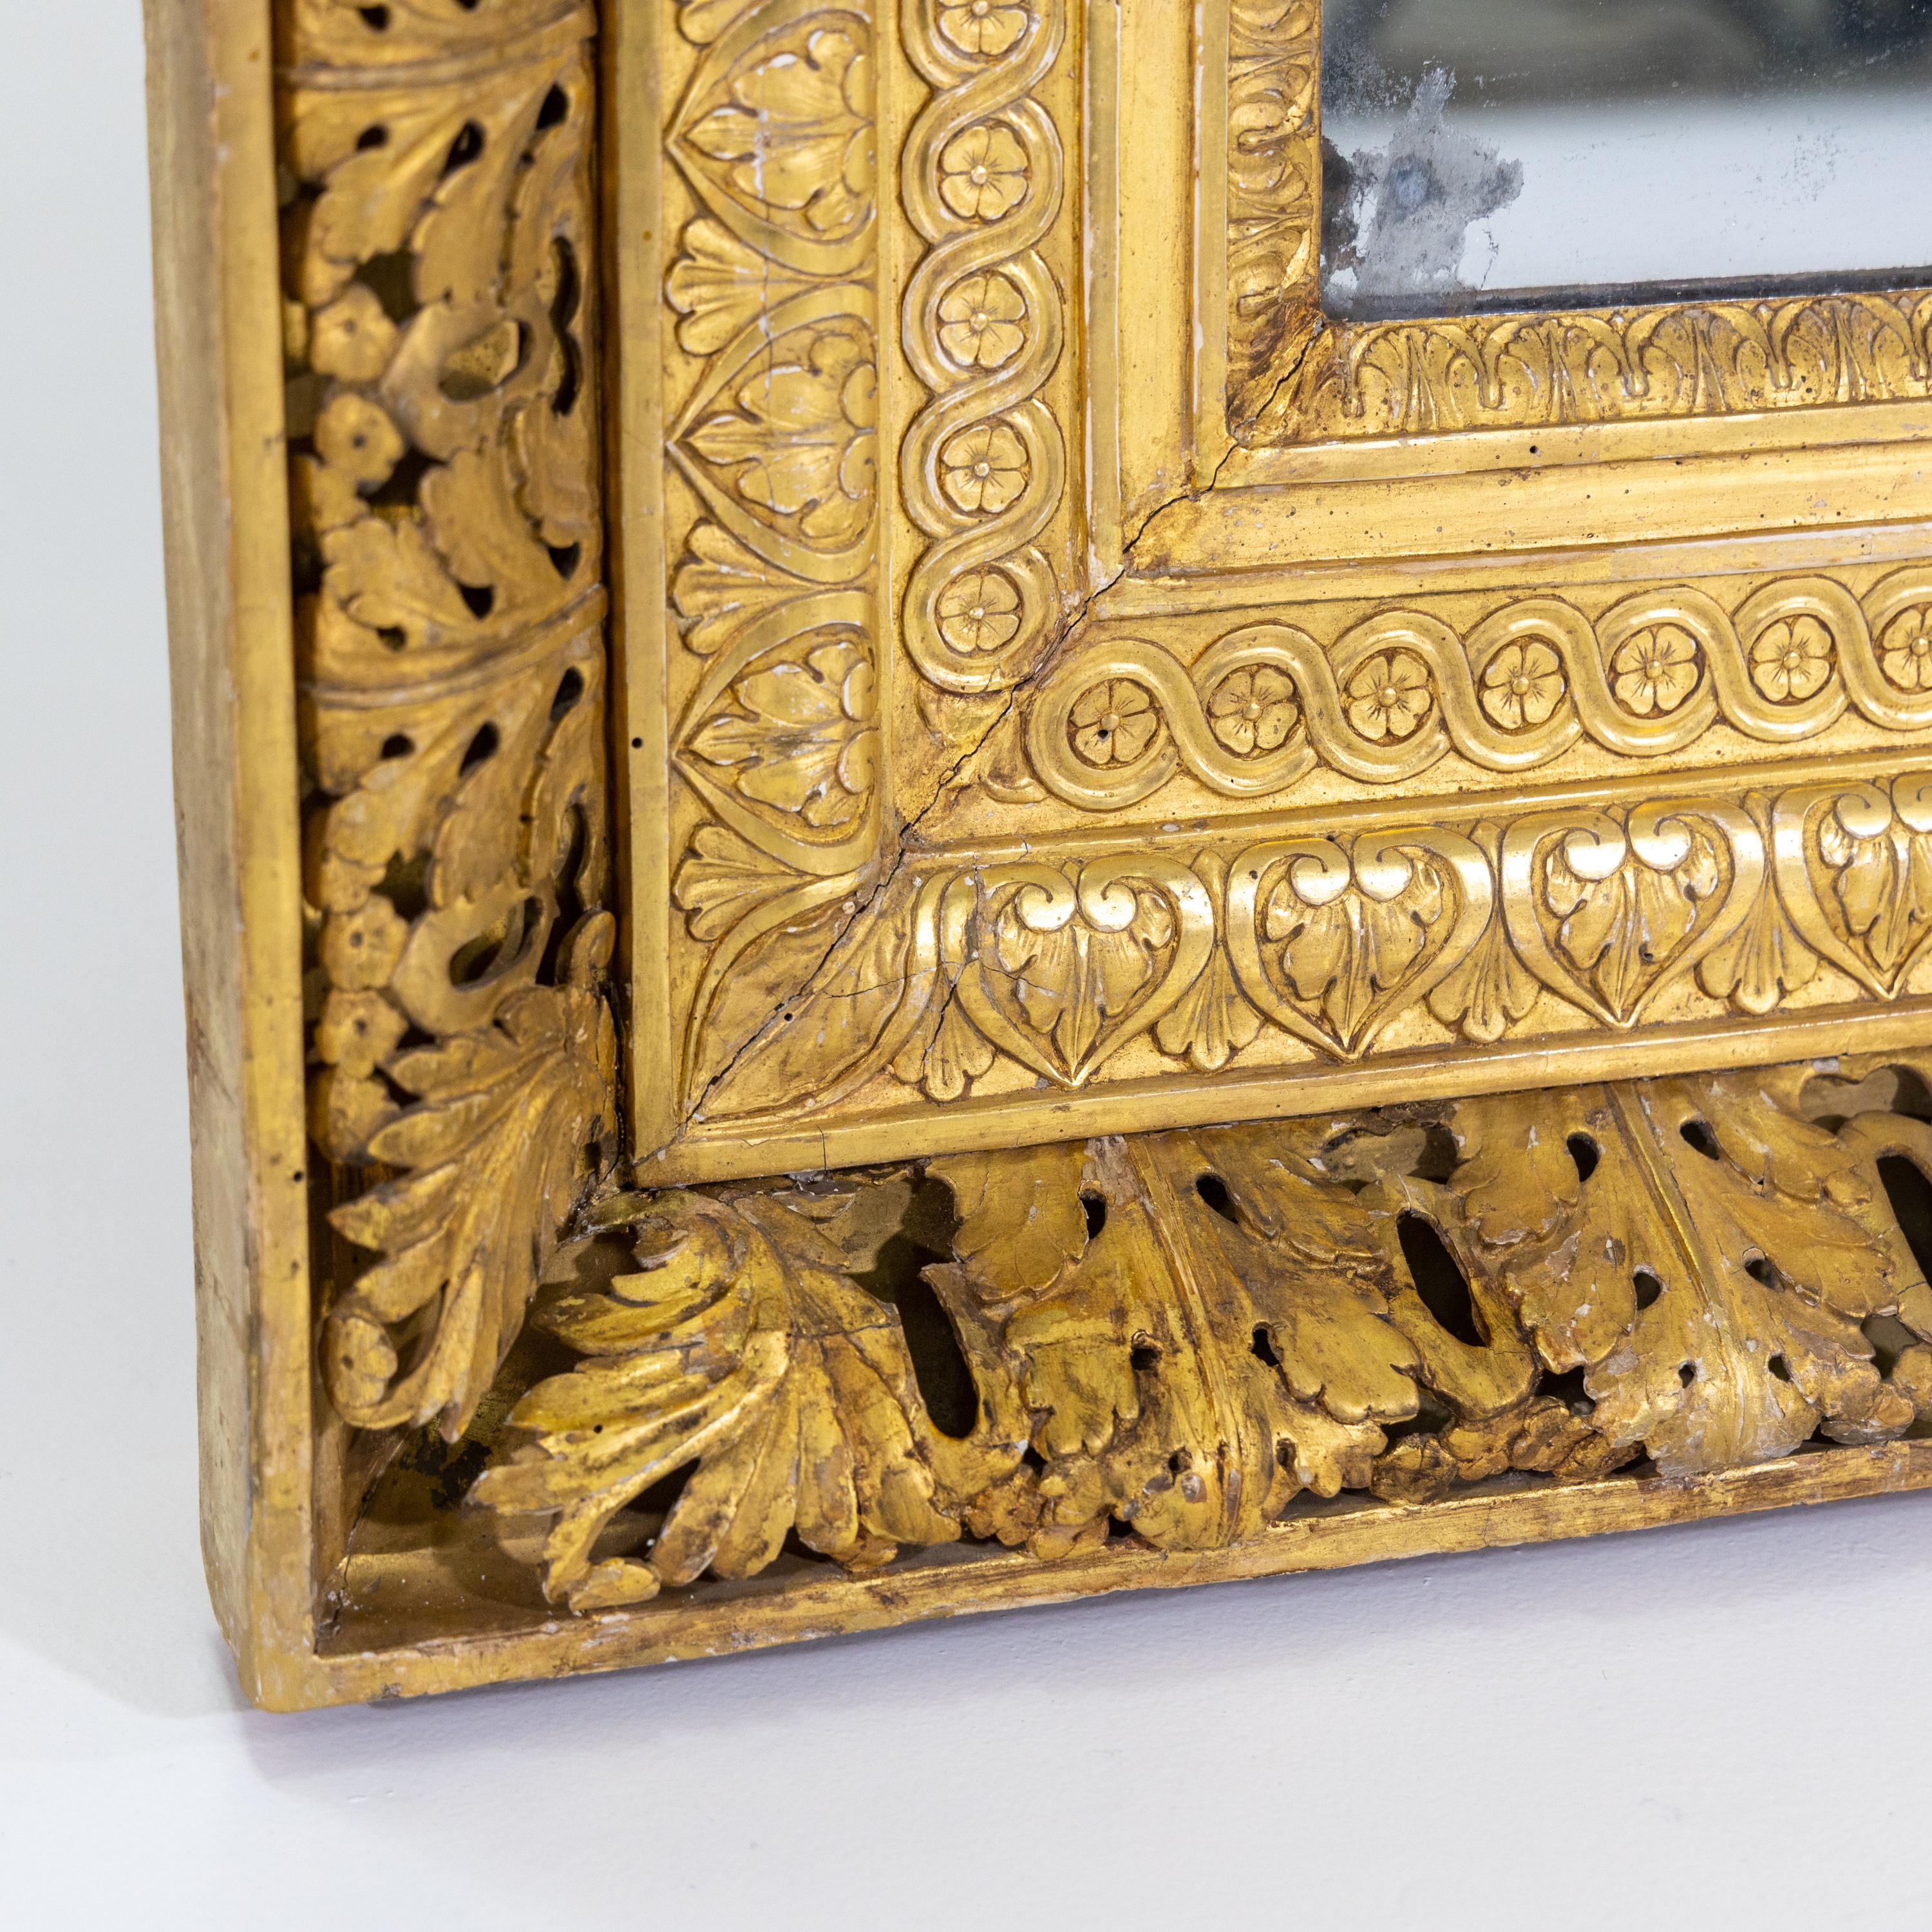 Wall mirror in a stuccoed and gold-patinated frame with openwork acanthus leaves, cymatium friezes and coin bands. The mirror glass has been renewed.
 